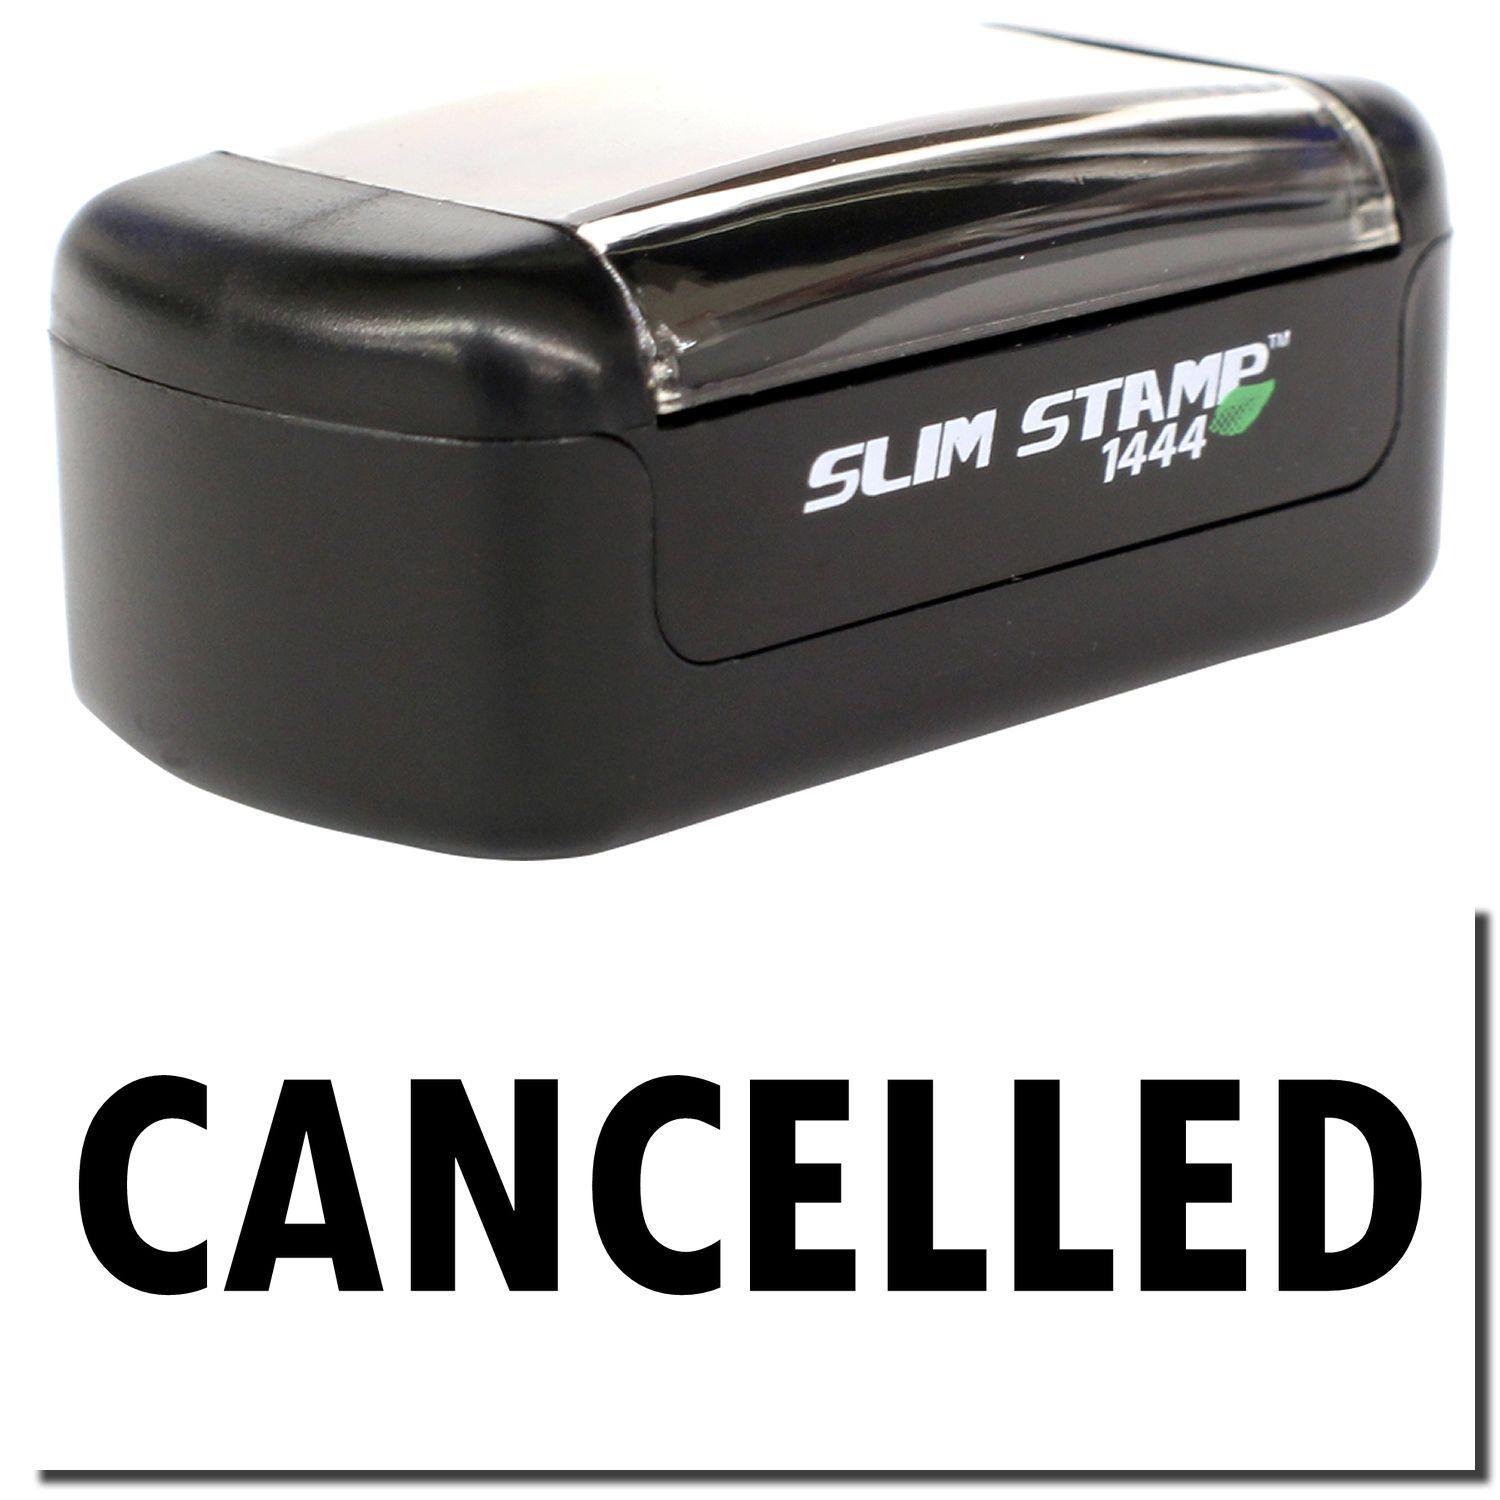 A stock office pre-inked stamp with a stamped image showing how the text "CANCELLED" is displayed after stamping.